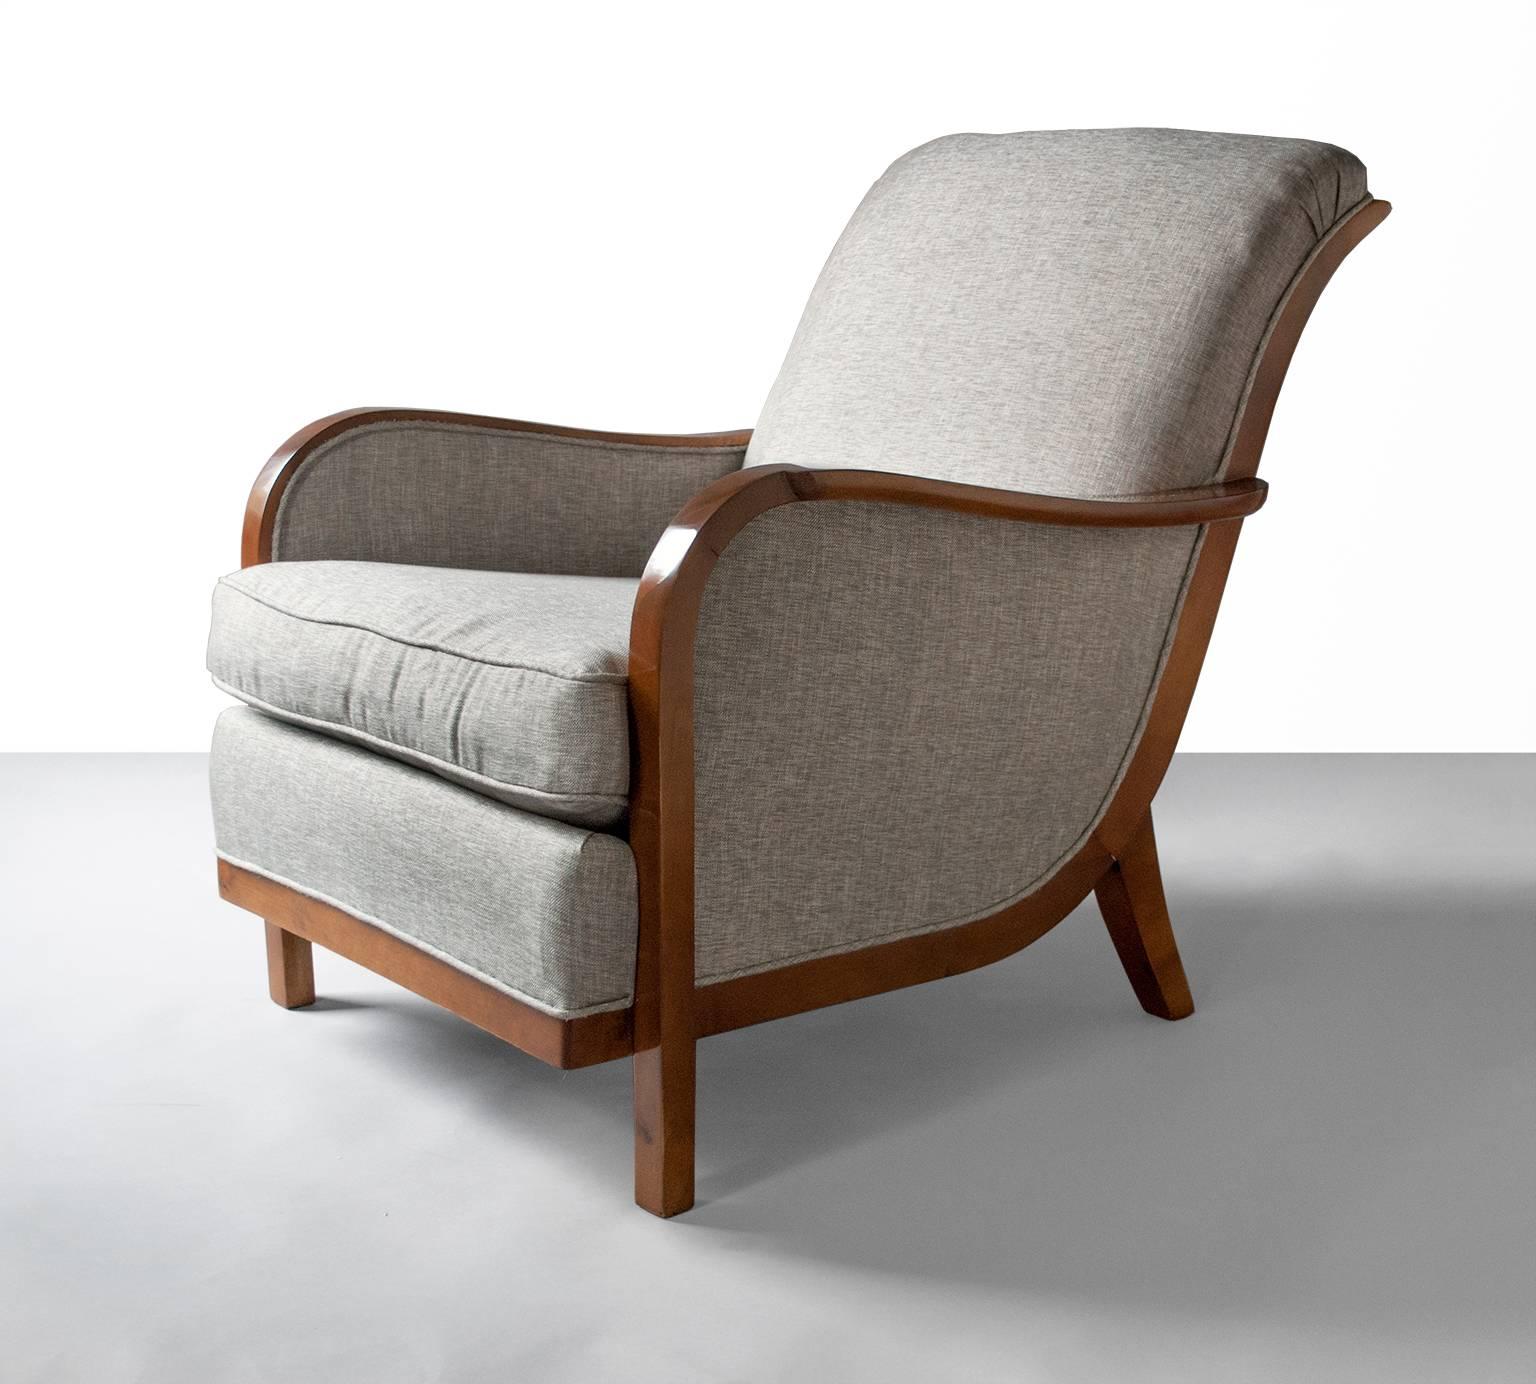 Elegant Swedish art deco armchair with a graceful scrolled back raised on sabre back legs. The chair is solid stained birch and features a cantilevered platform seat with upholstered cushion. Produced by Wilhelm Knoll, Malmo, 1933. Newly refinished